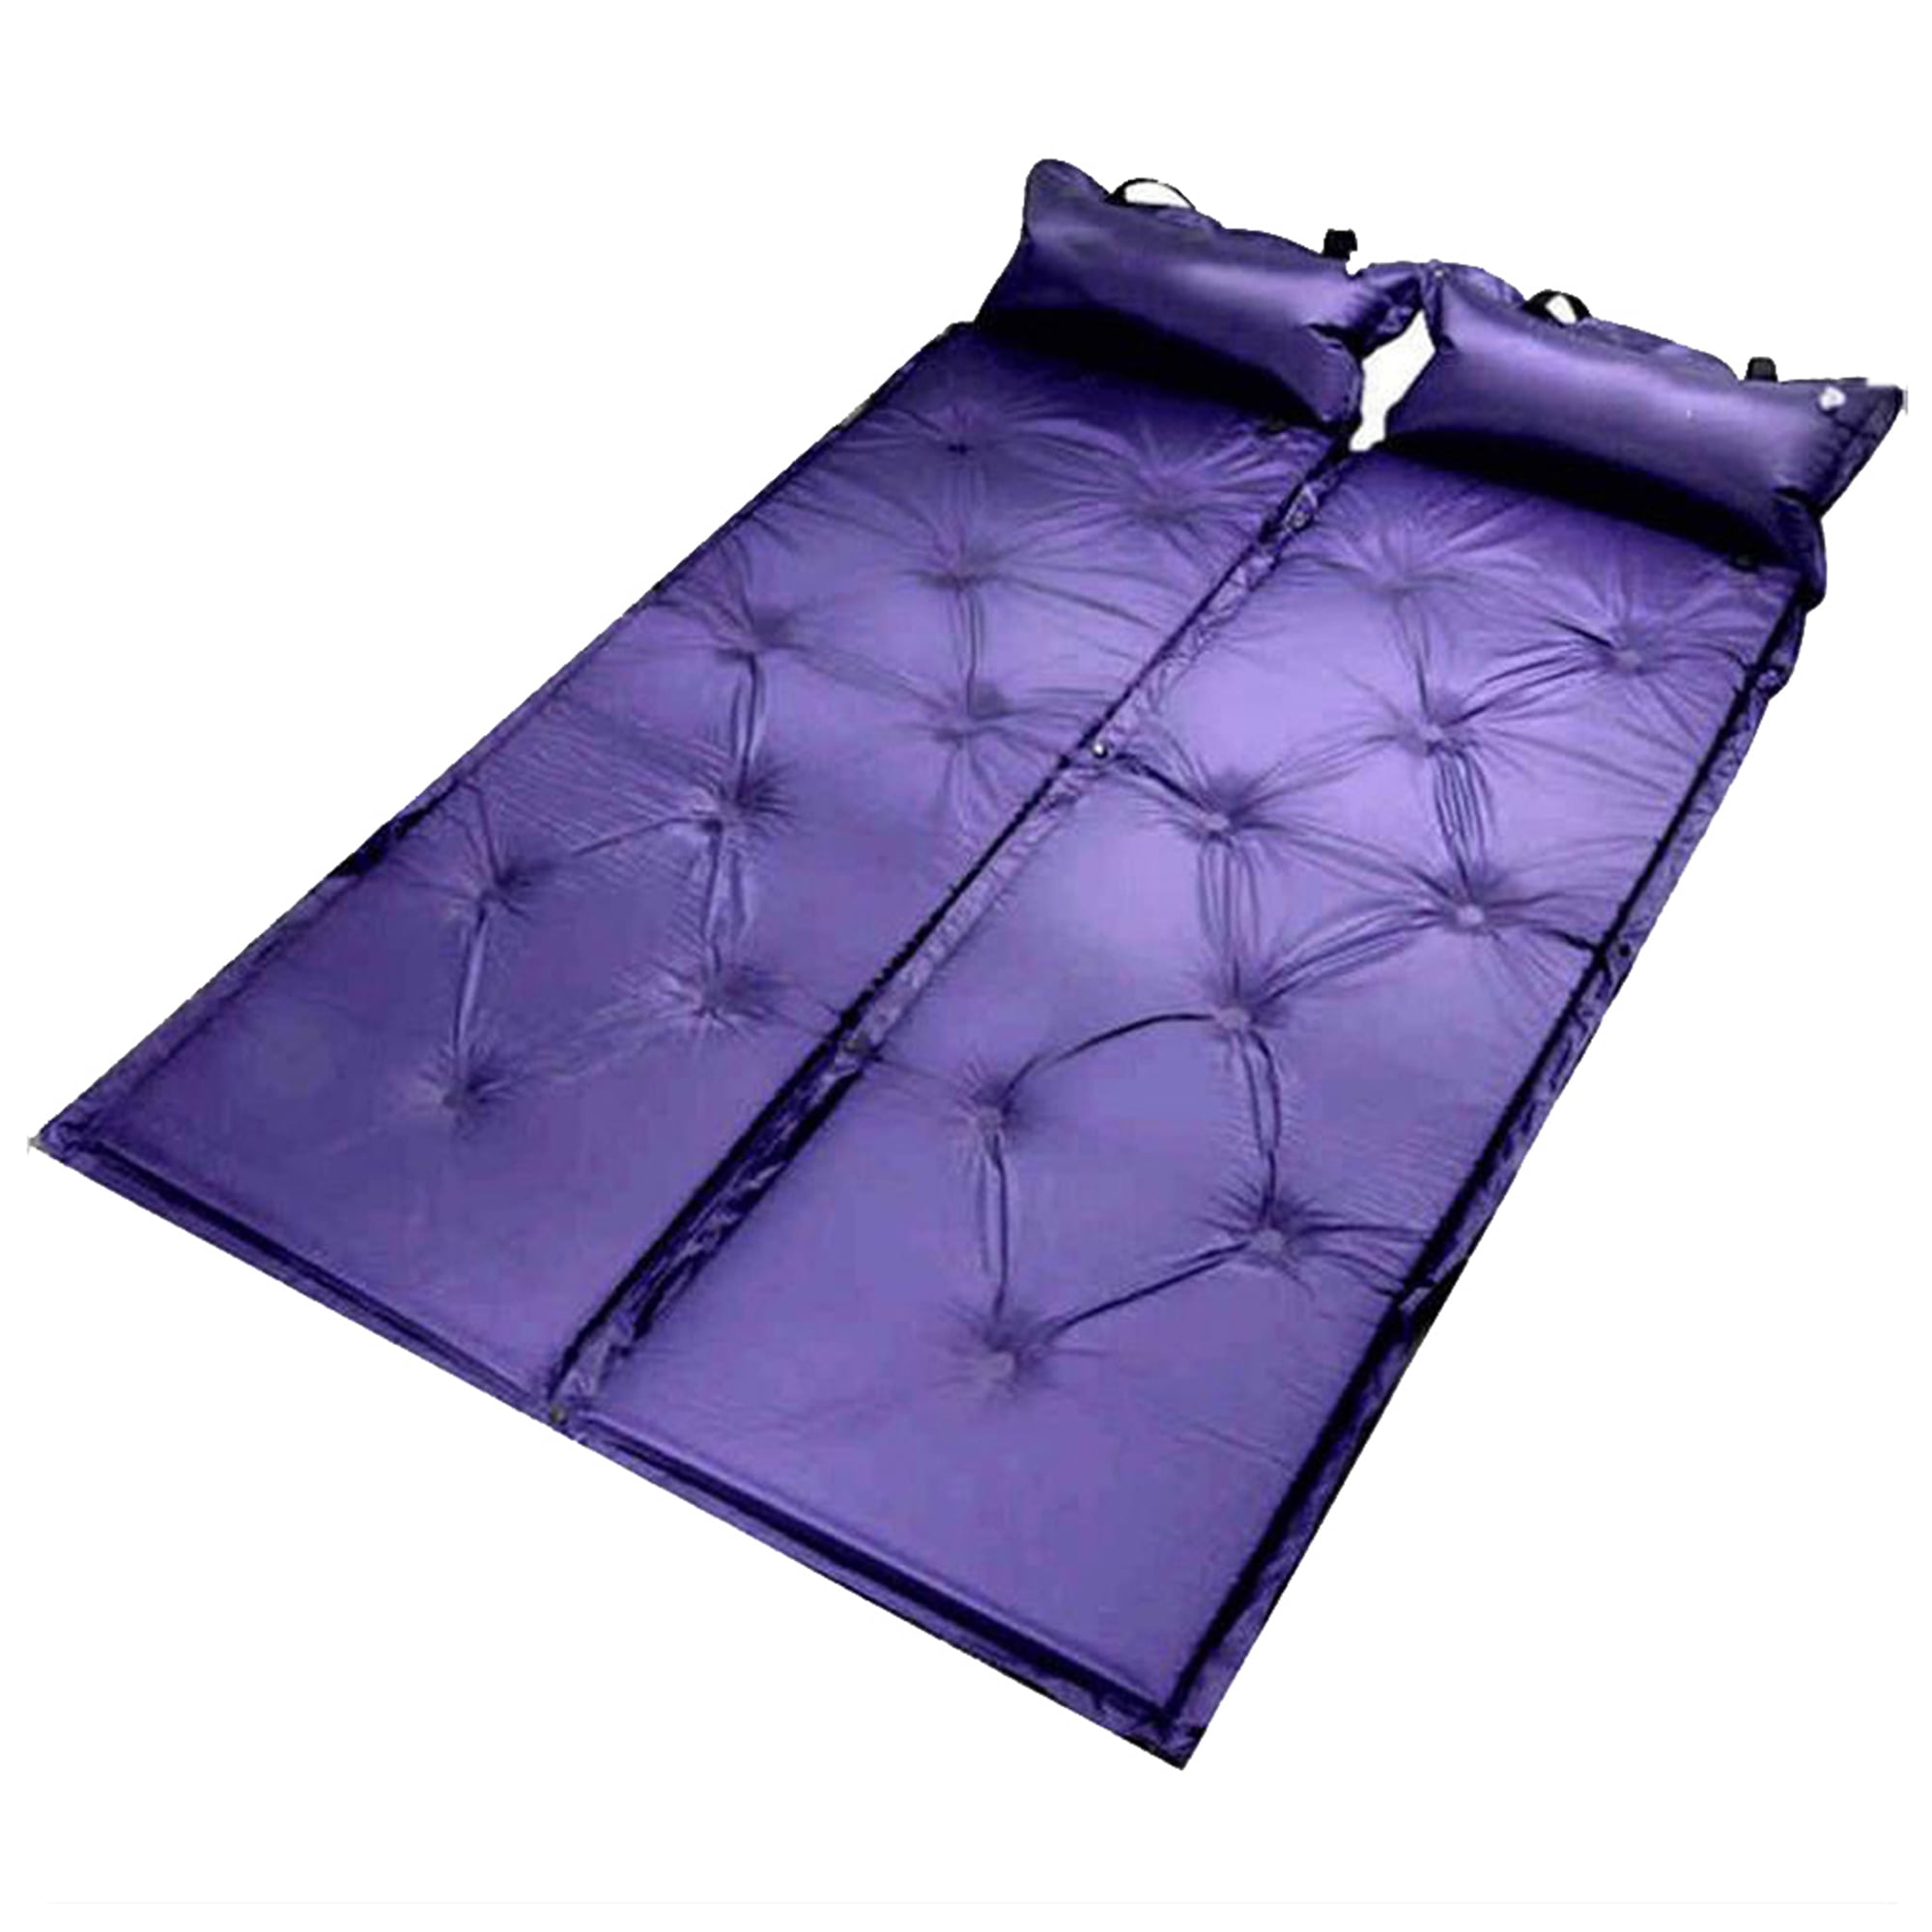 DOUBLE OR SINGLE SELF INFLATING MEMORY FOAM SLEEPING FLOOR MAT CAMP AIRBED BED 